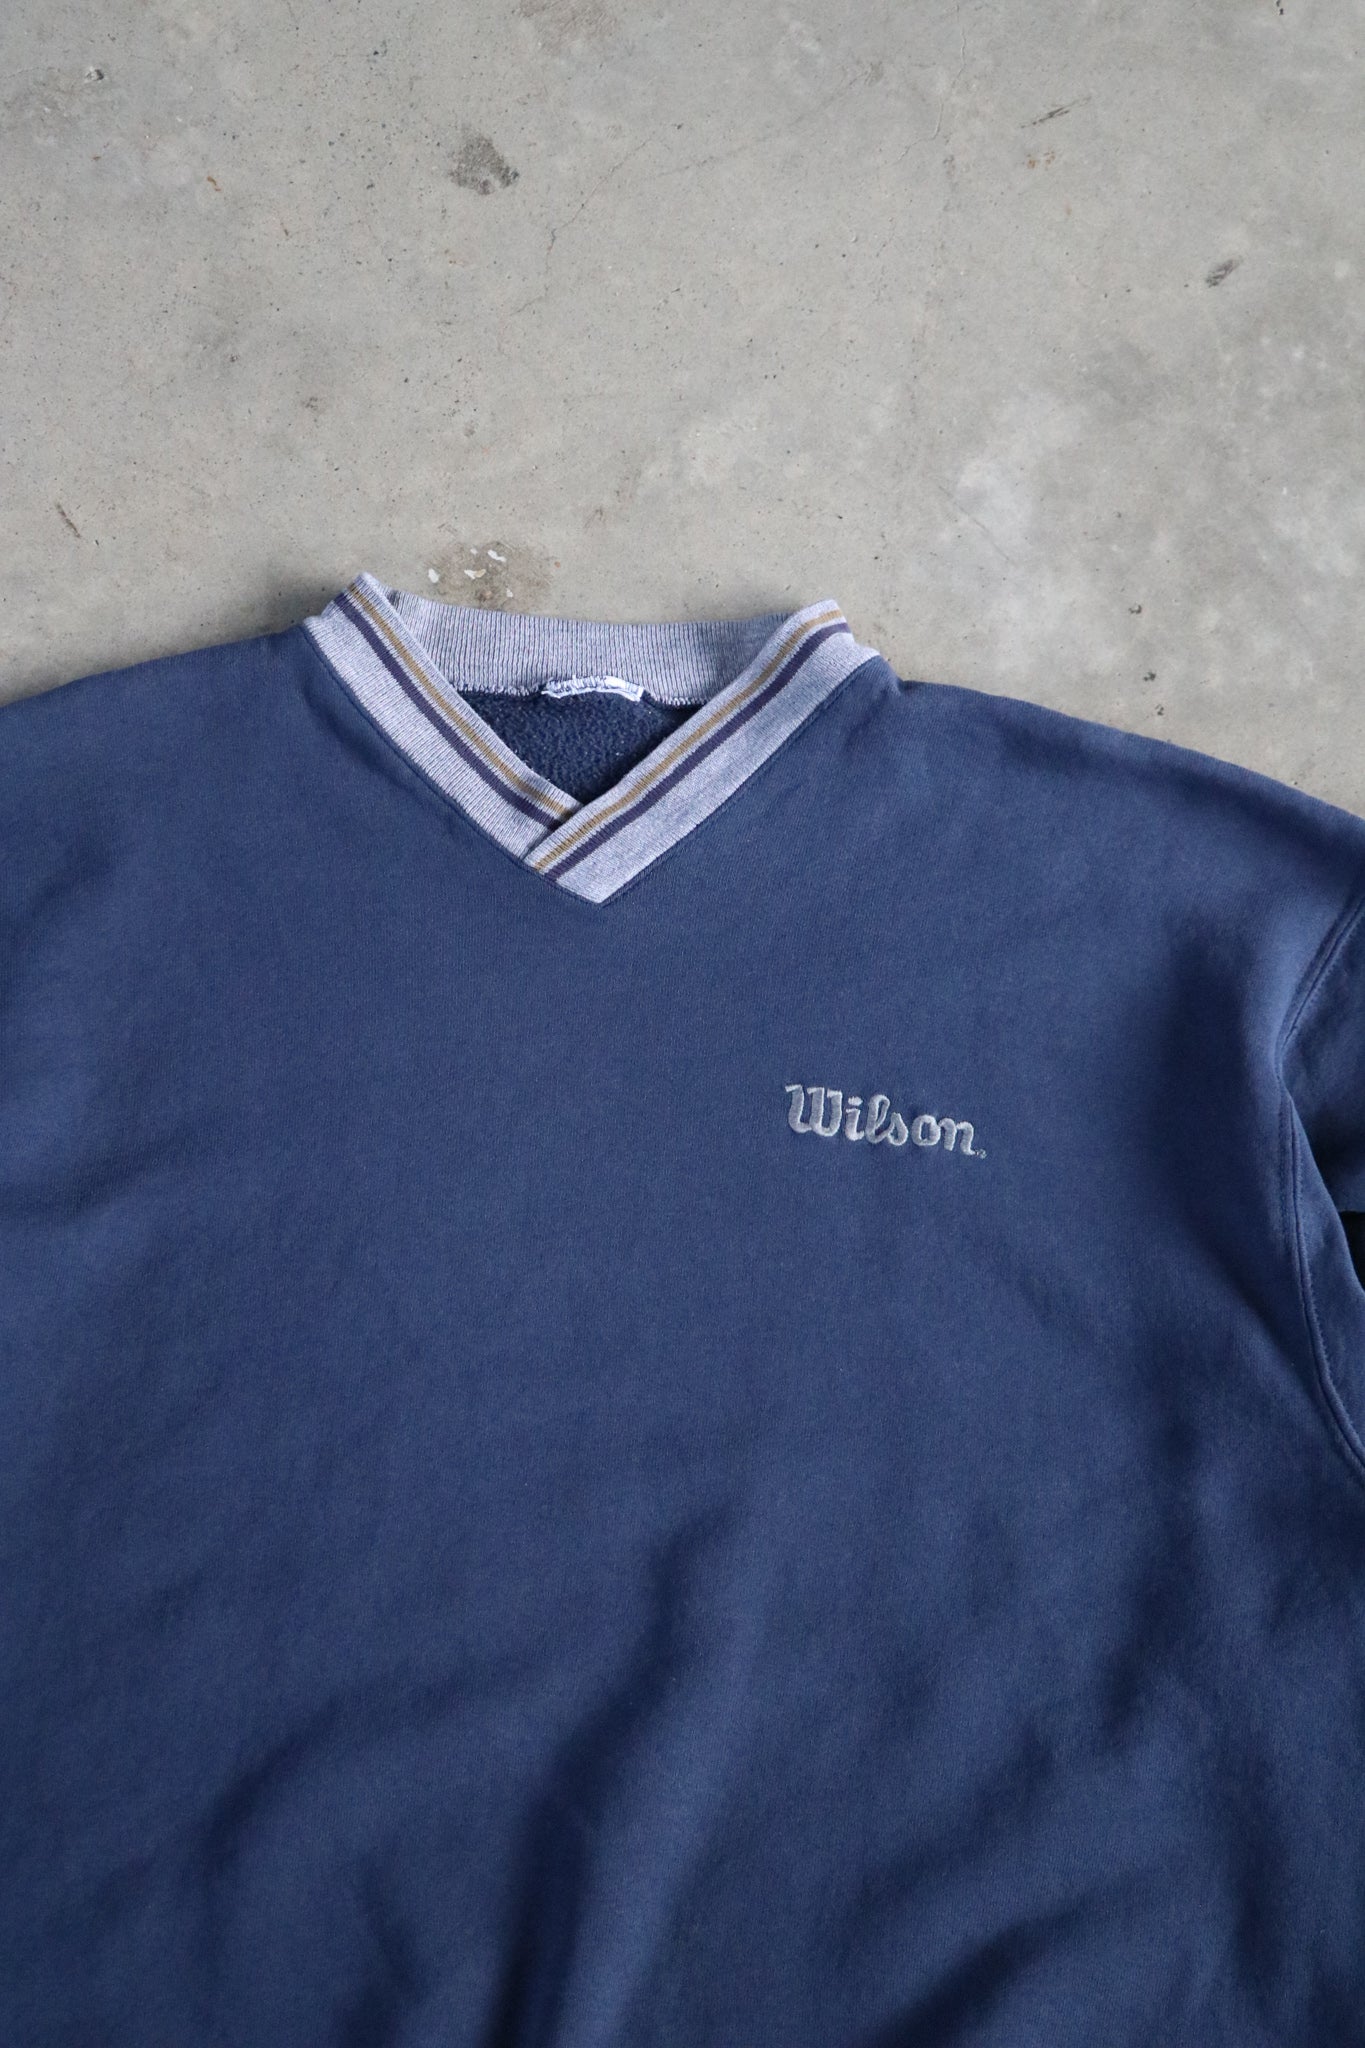 Vintage Wilson Embroided Sweater XL